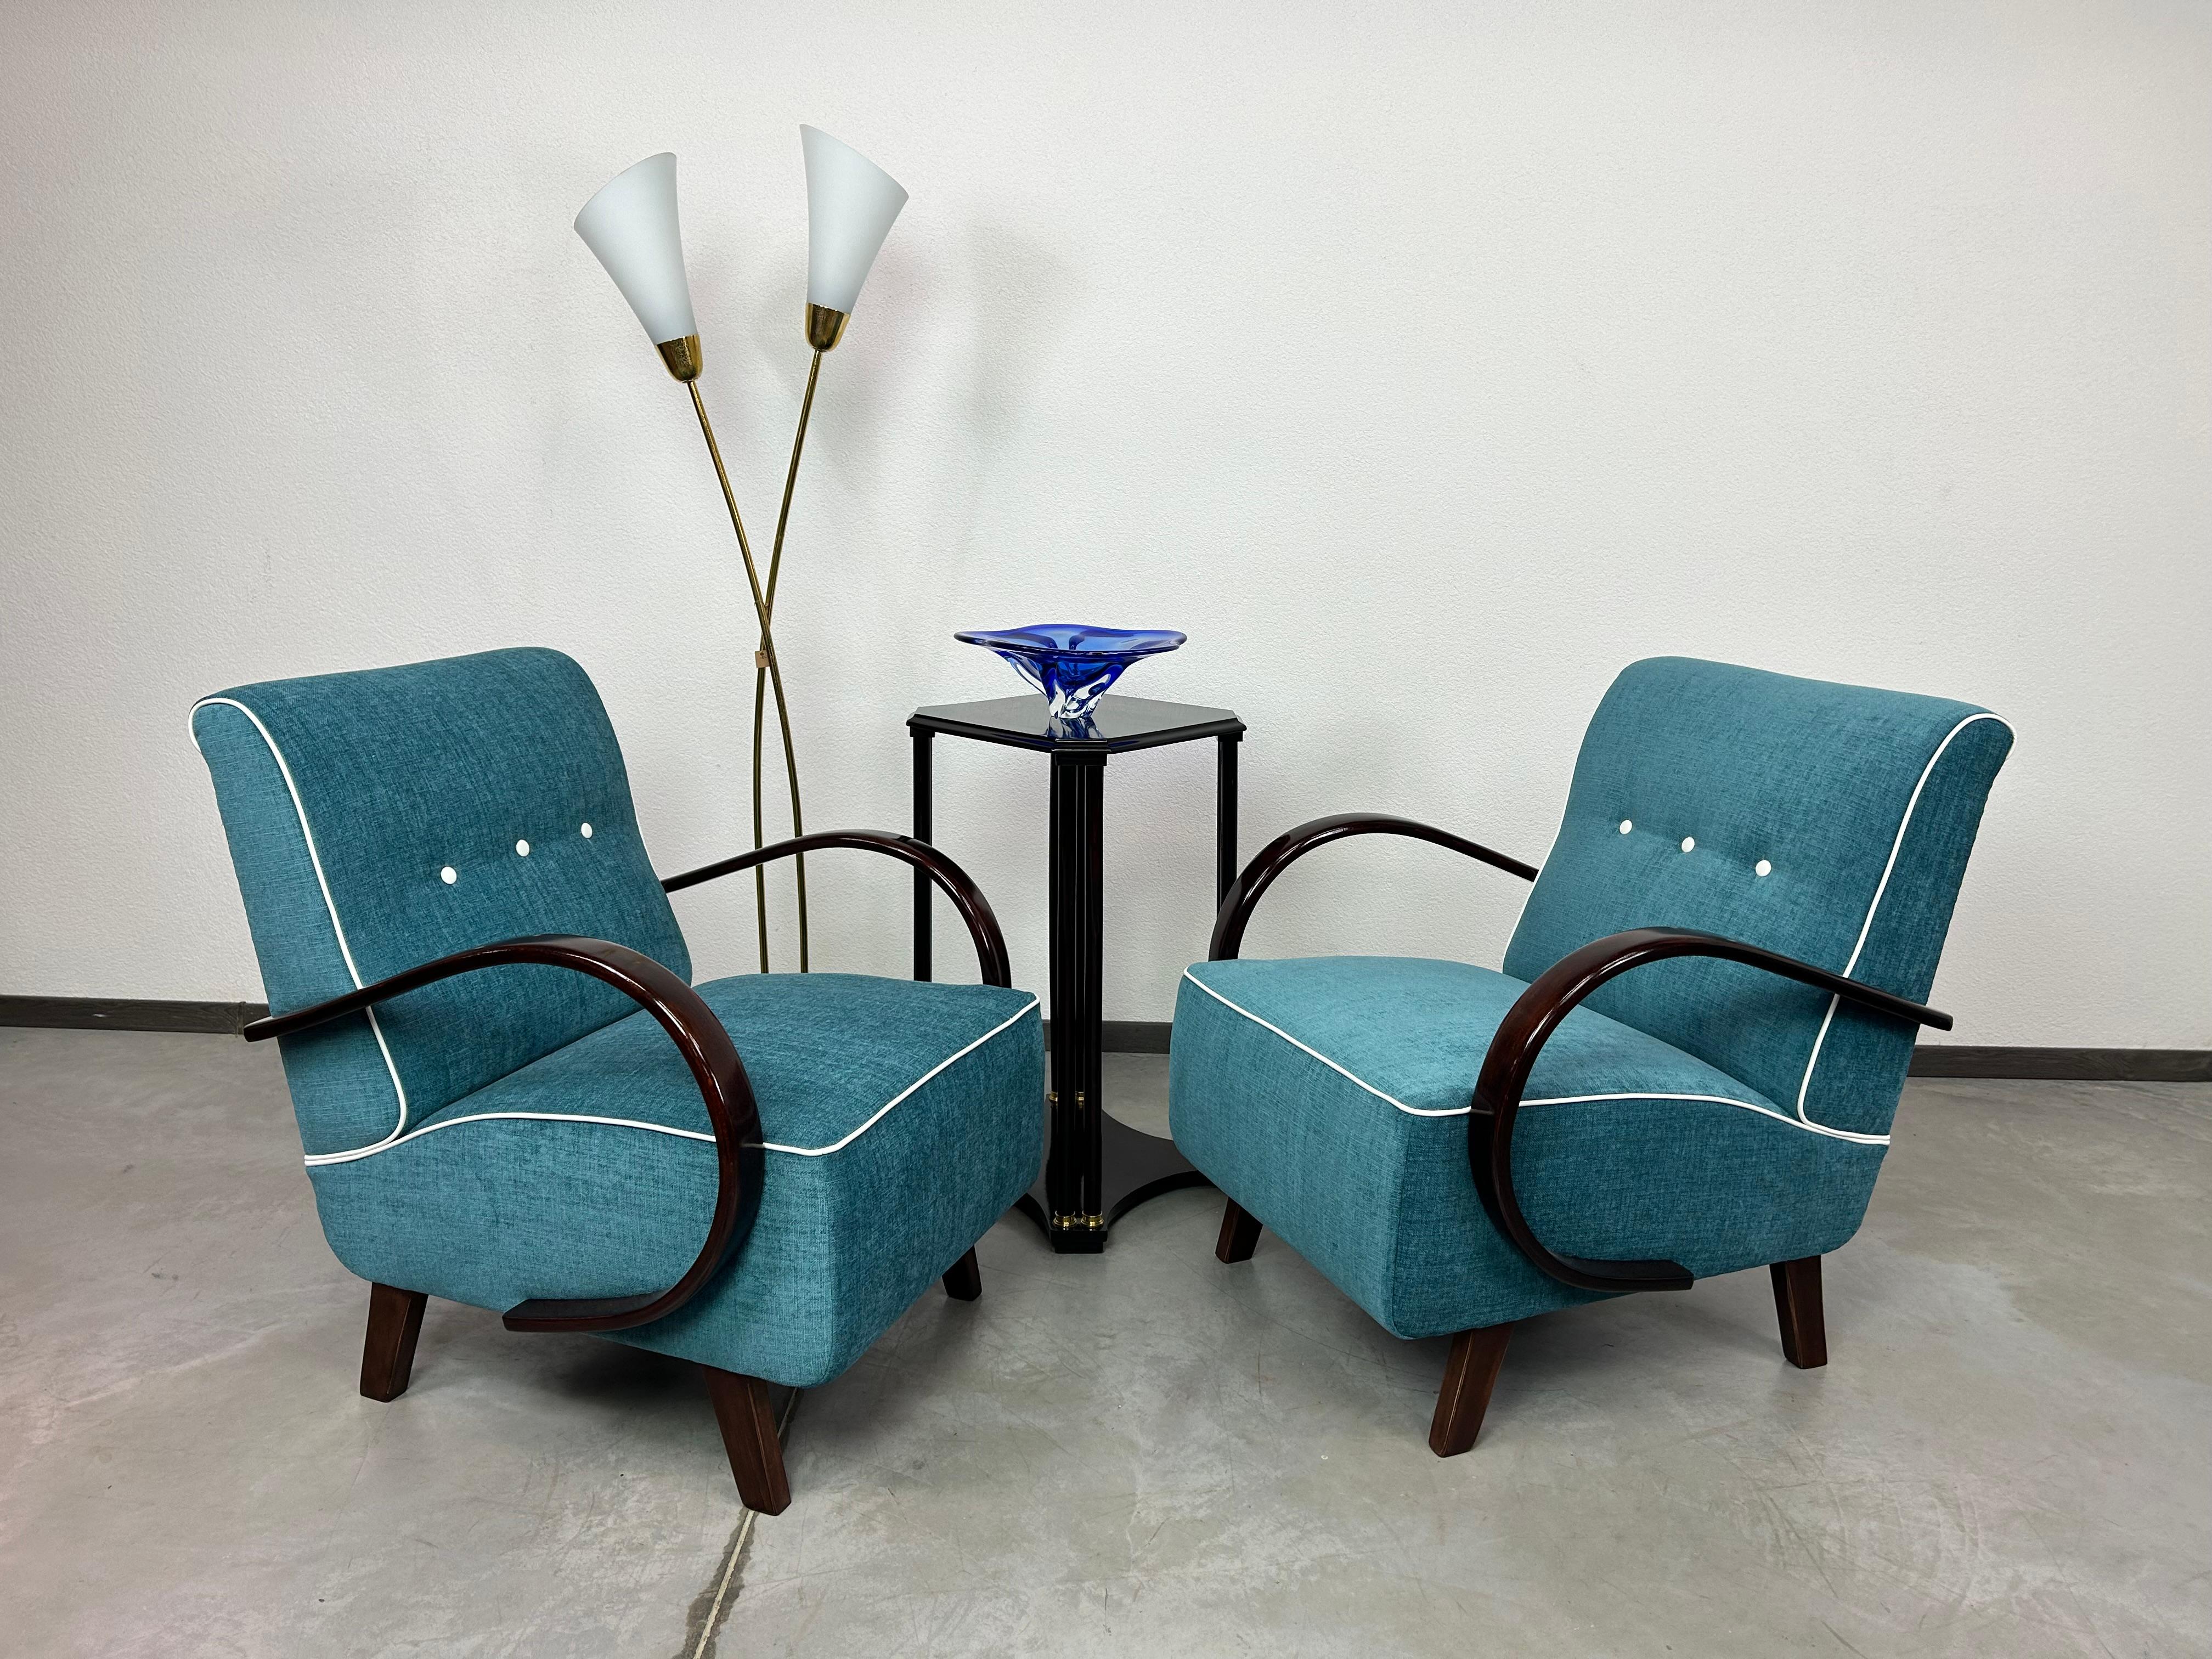 Blue art deco armchairs by Jindřich Halabala designed in 1930s when Halabala was leading designer for UP Závody Brno. Professionally stained and repolished with new fabric.